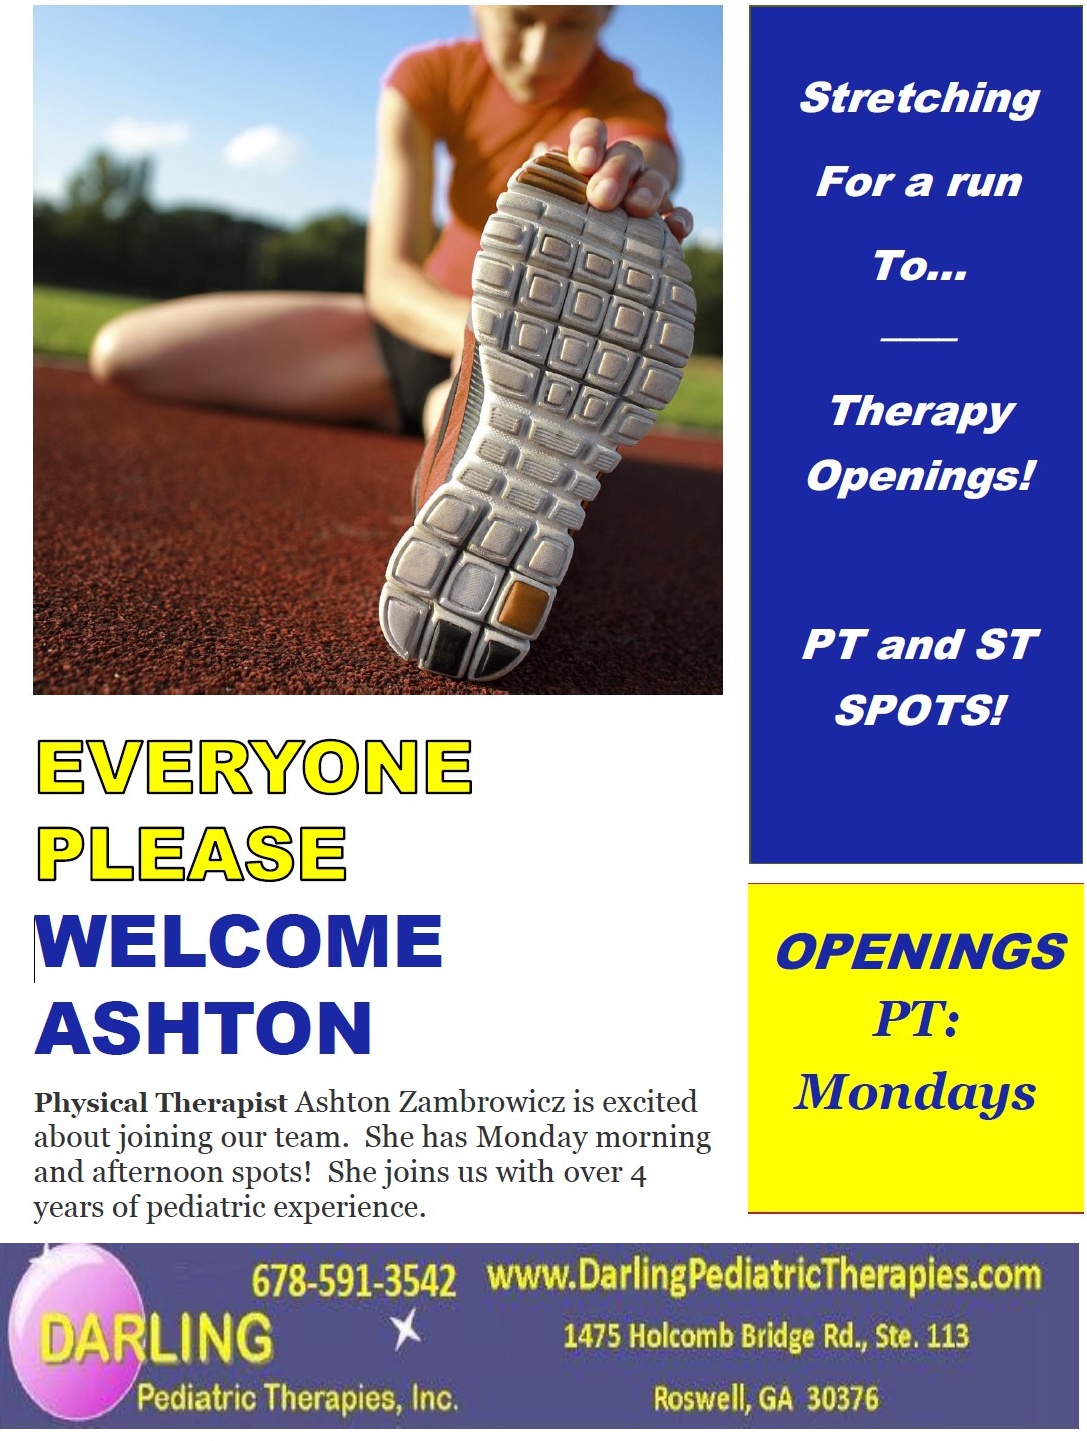 DPT has Physical Therapy Openings!